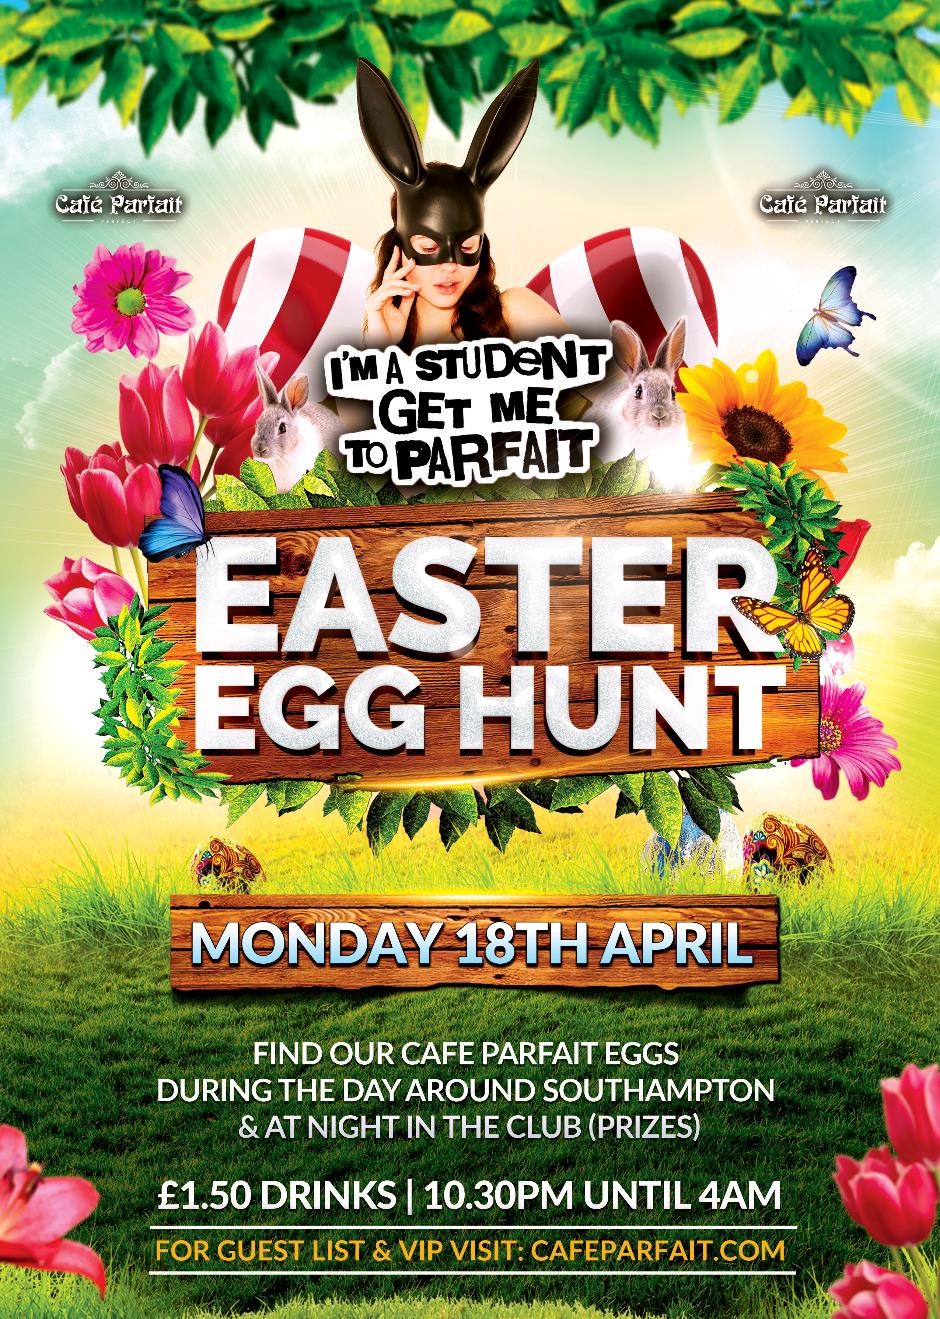 Easter Egg Hunt//I’m A Student Get Me To Parfait